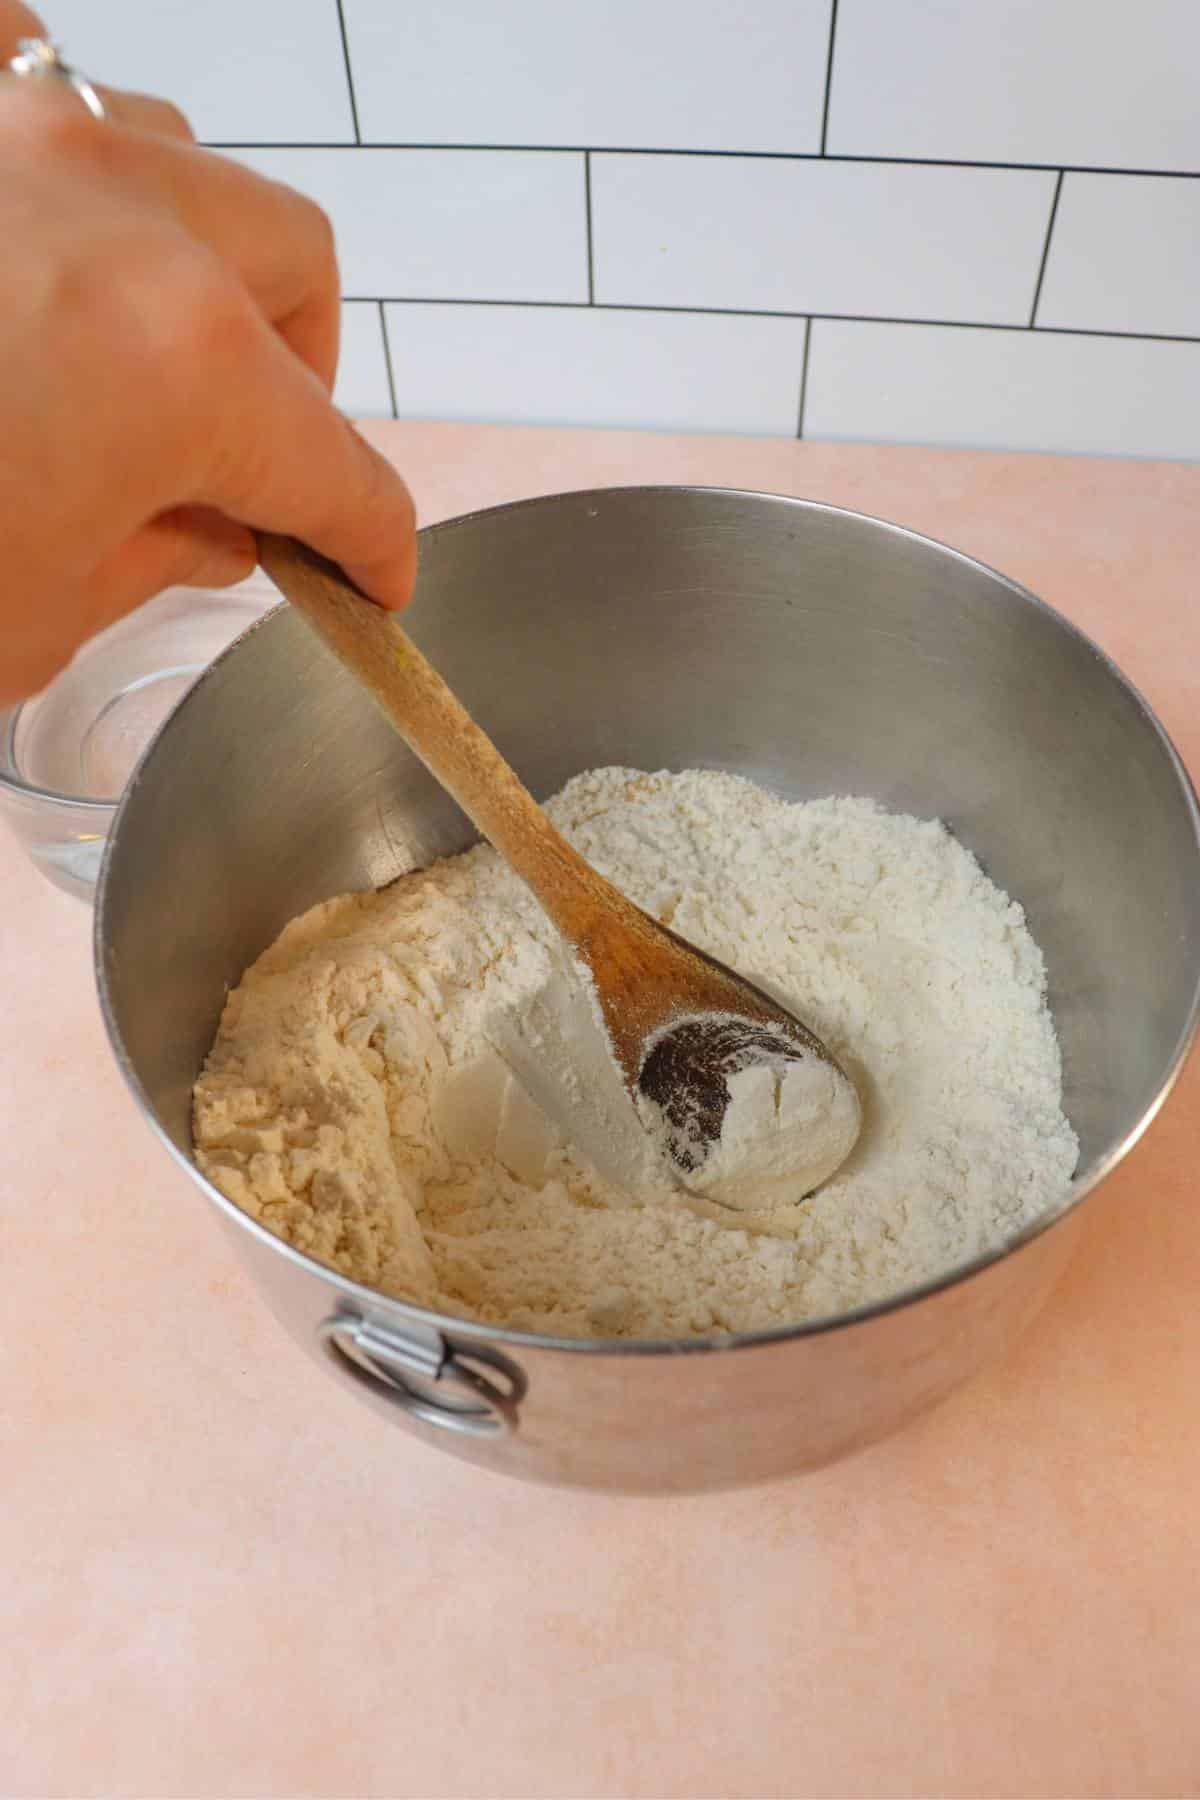 Dry ingredients for homemade bread being mixed together in a mixing bowl.